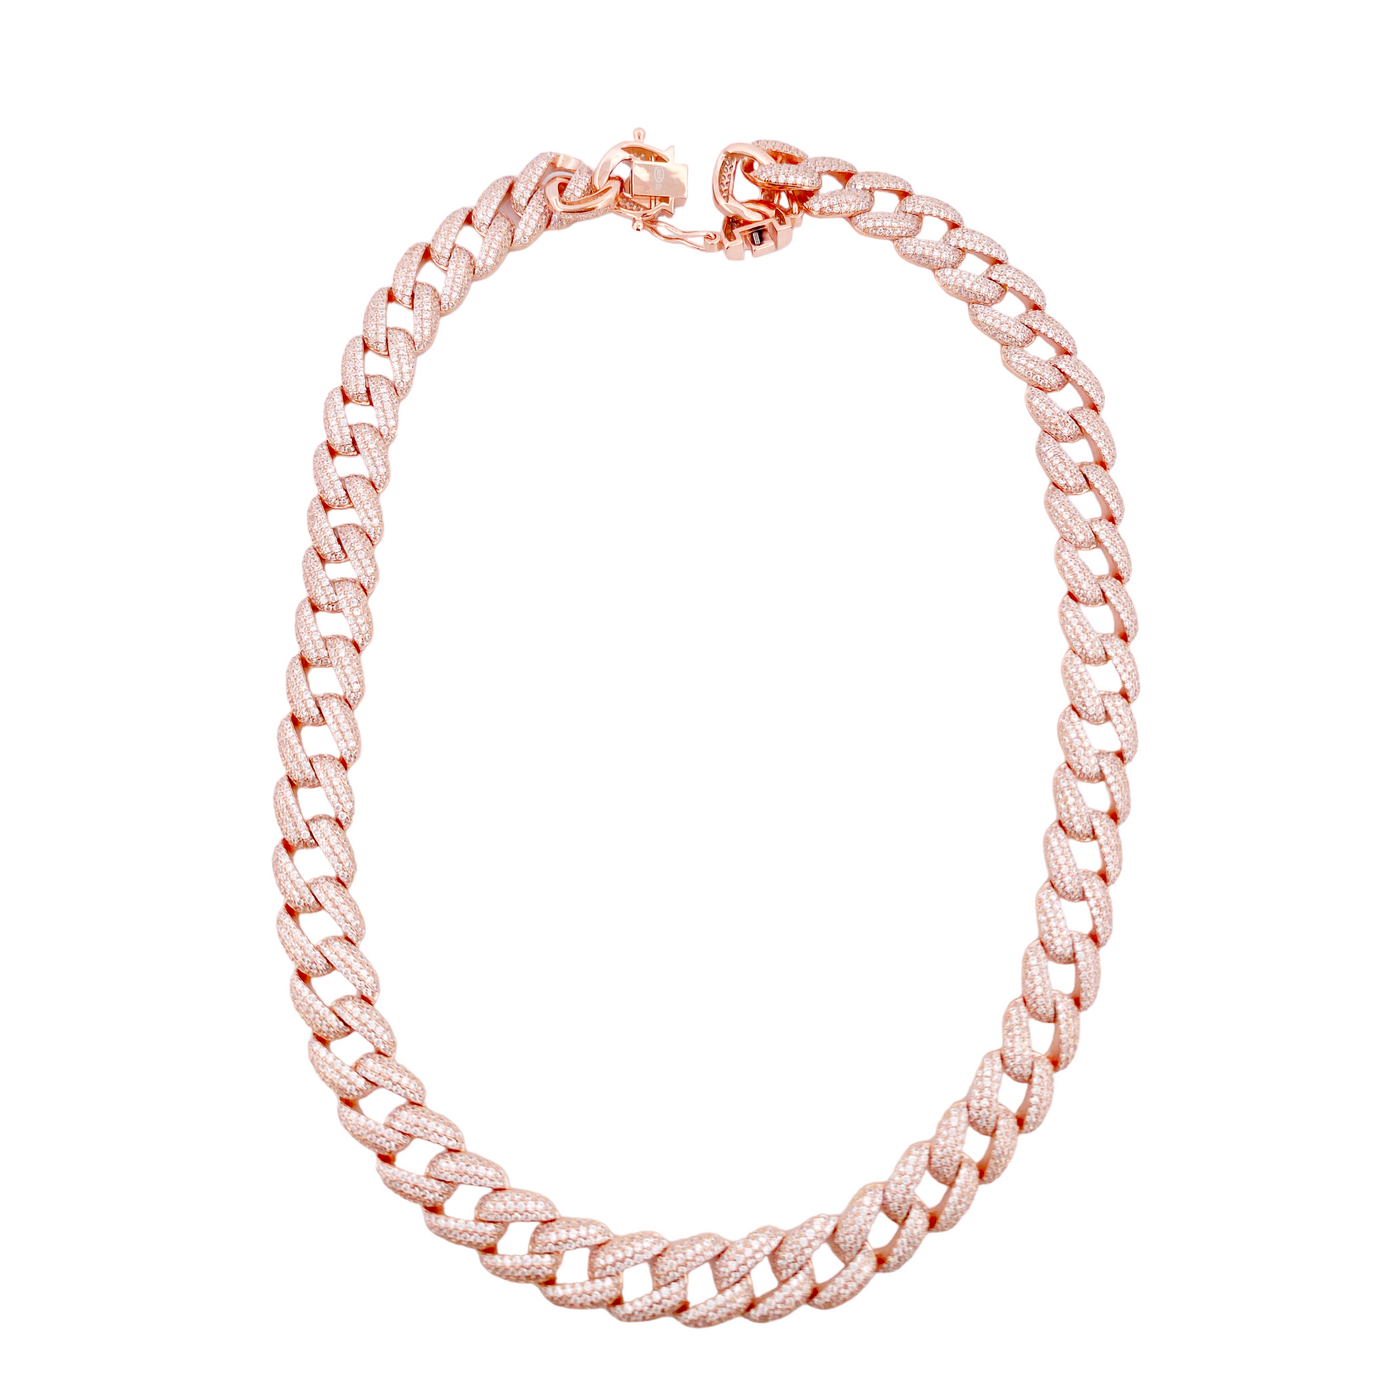 SILVER GROUMETTE NECKLACE - ROSE PLATED